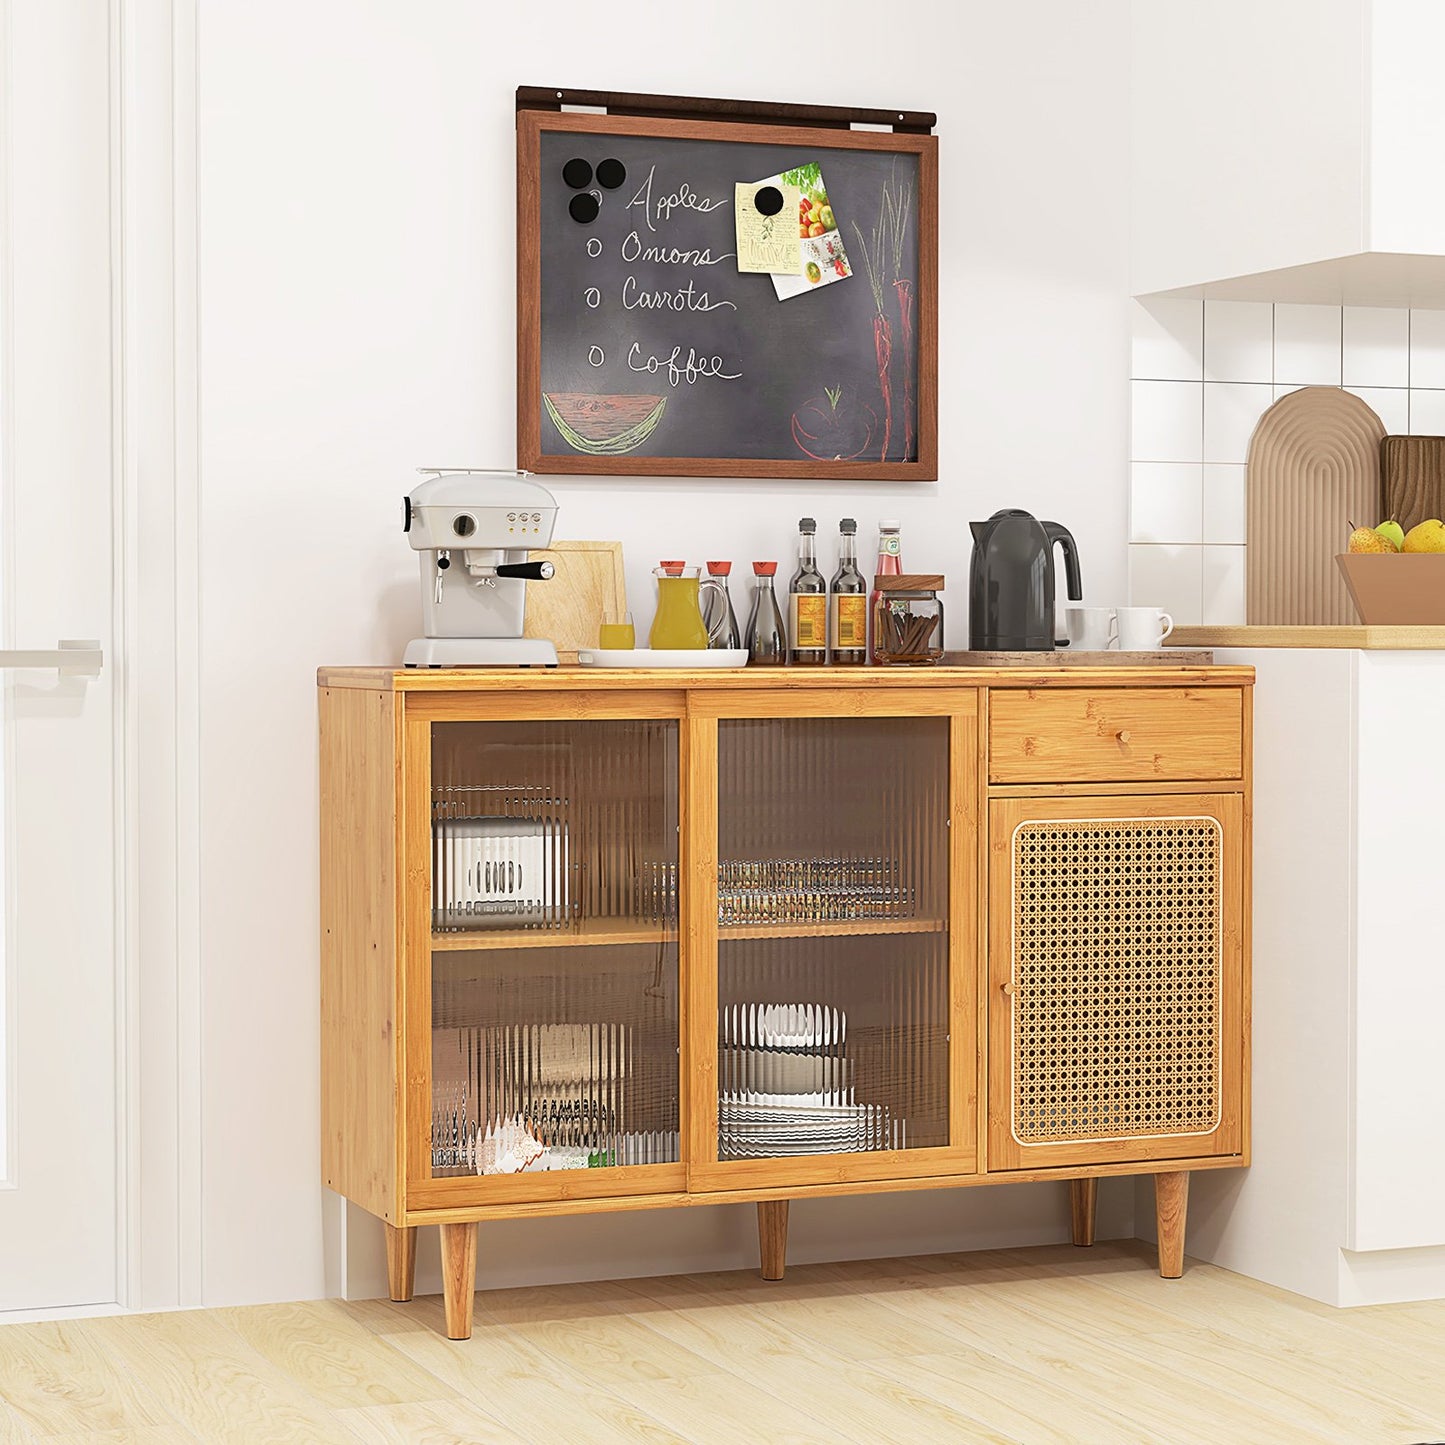 Modern Bamboo Buffet Sideboard Cabinet with Tempered Glass Sliding Doors, Natural